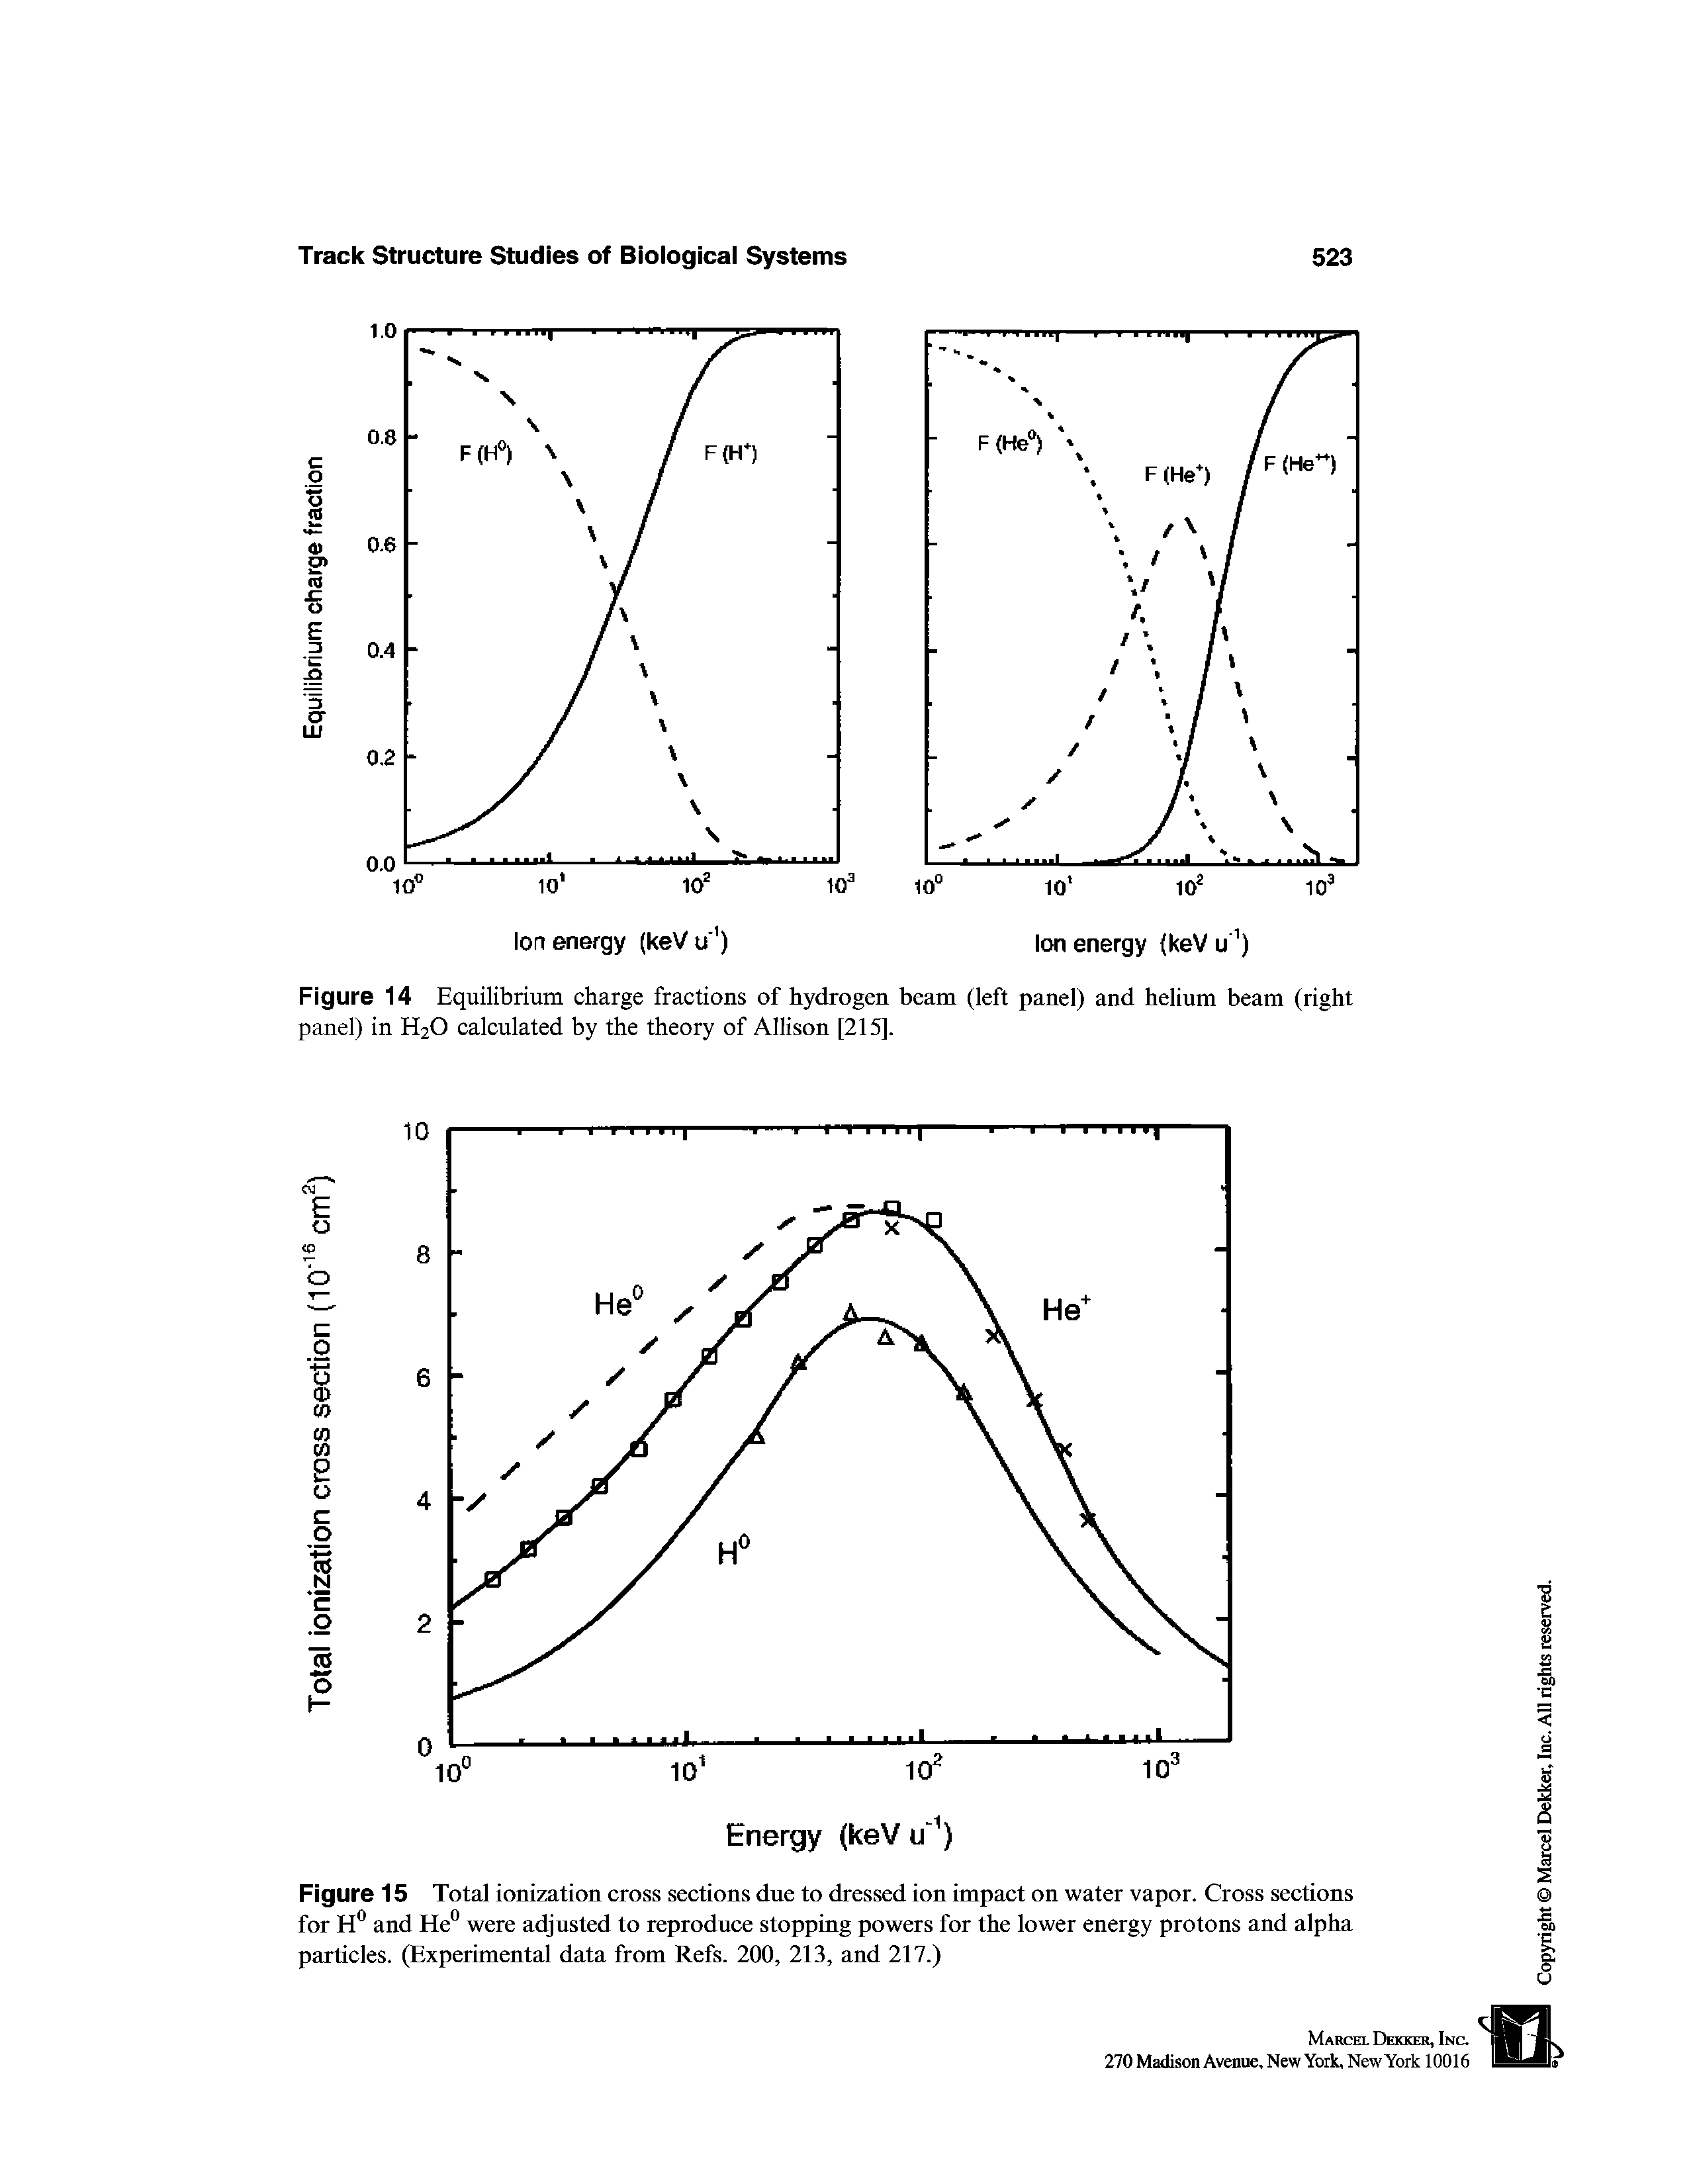 Figure 15 Total ionization cross sections due to dressed ion impact on water vapor. Cross sections for and He were adjusted to reproduce stopping powers for the lower energy protons and alpha particles. (Experimental data from Refs. 200, 213, and 217.)...